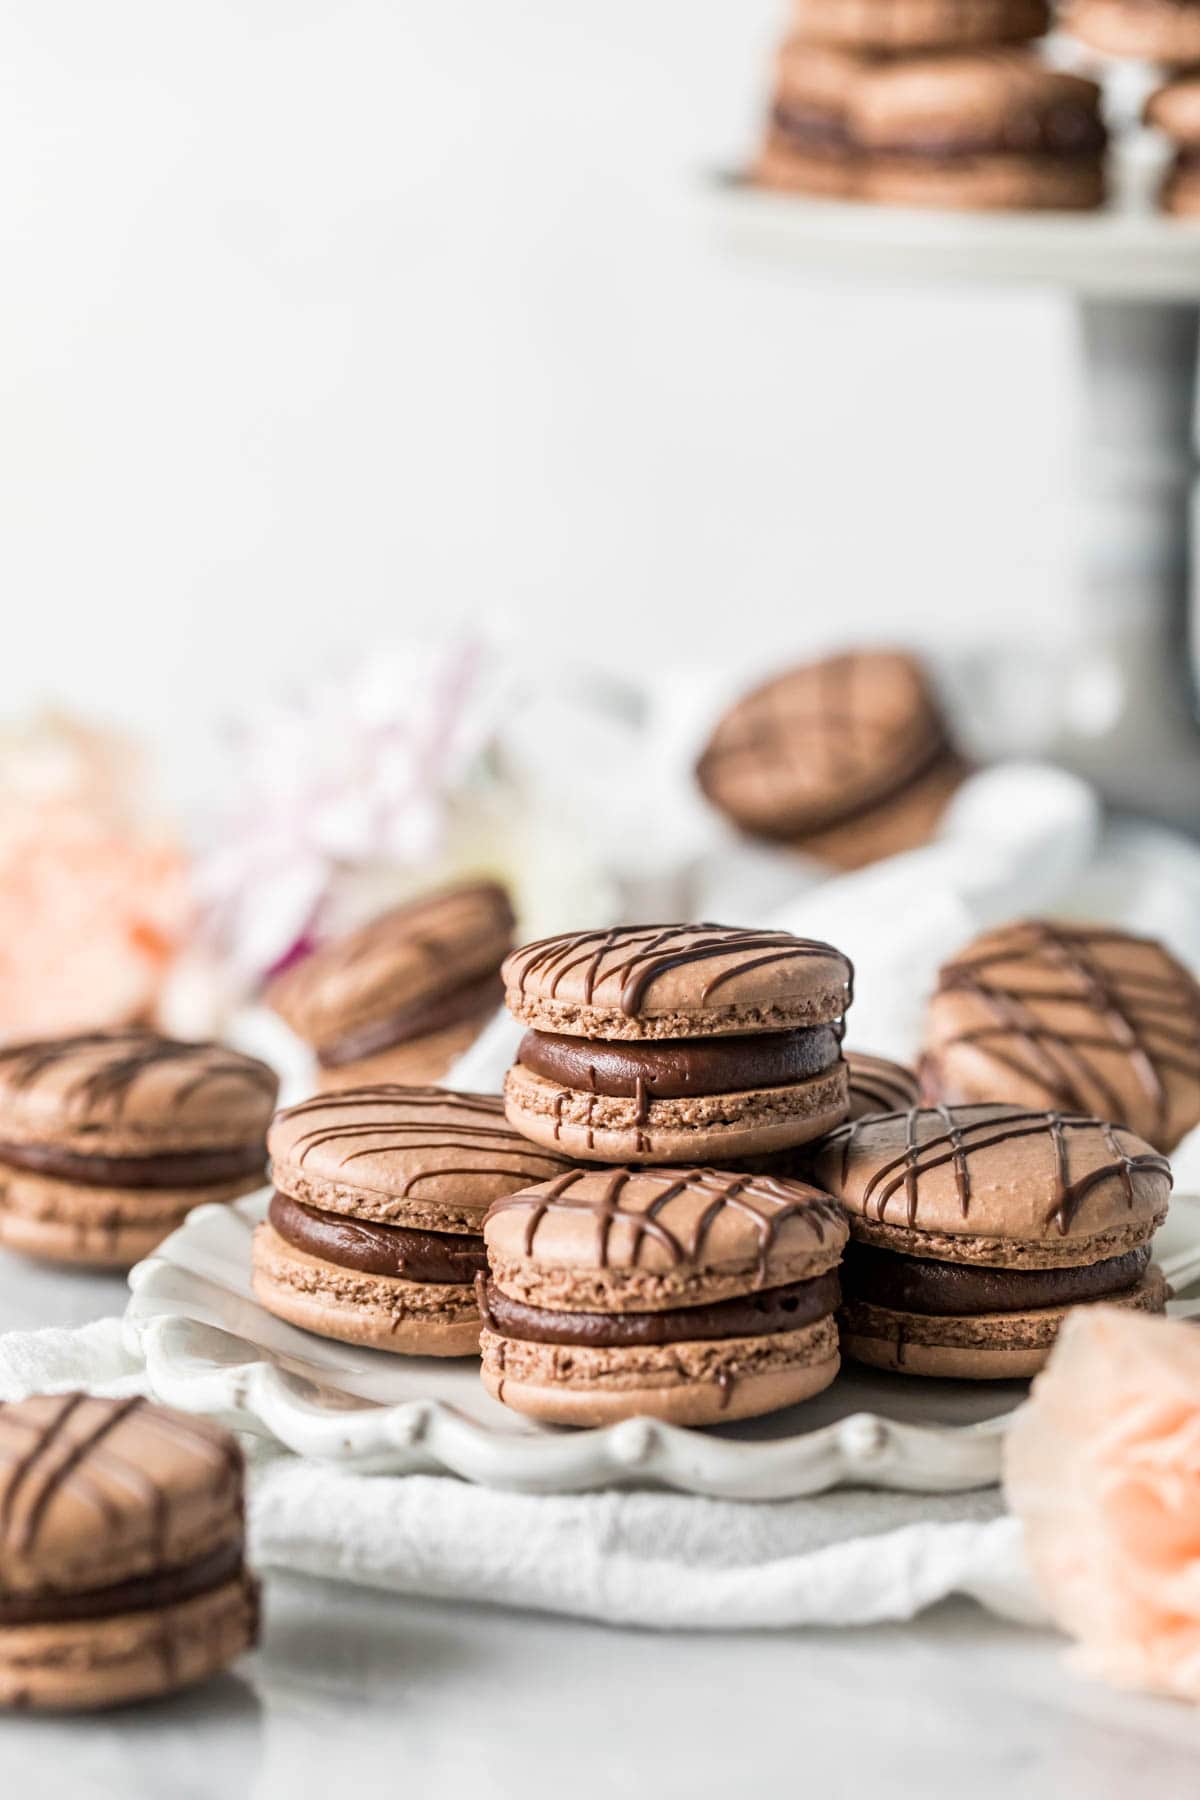 Plate of chocolate macarons drizzled with chocolate.